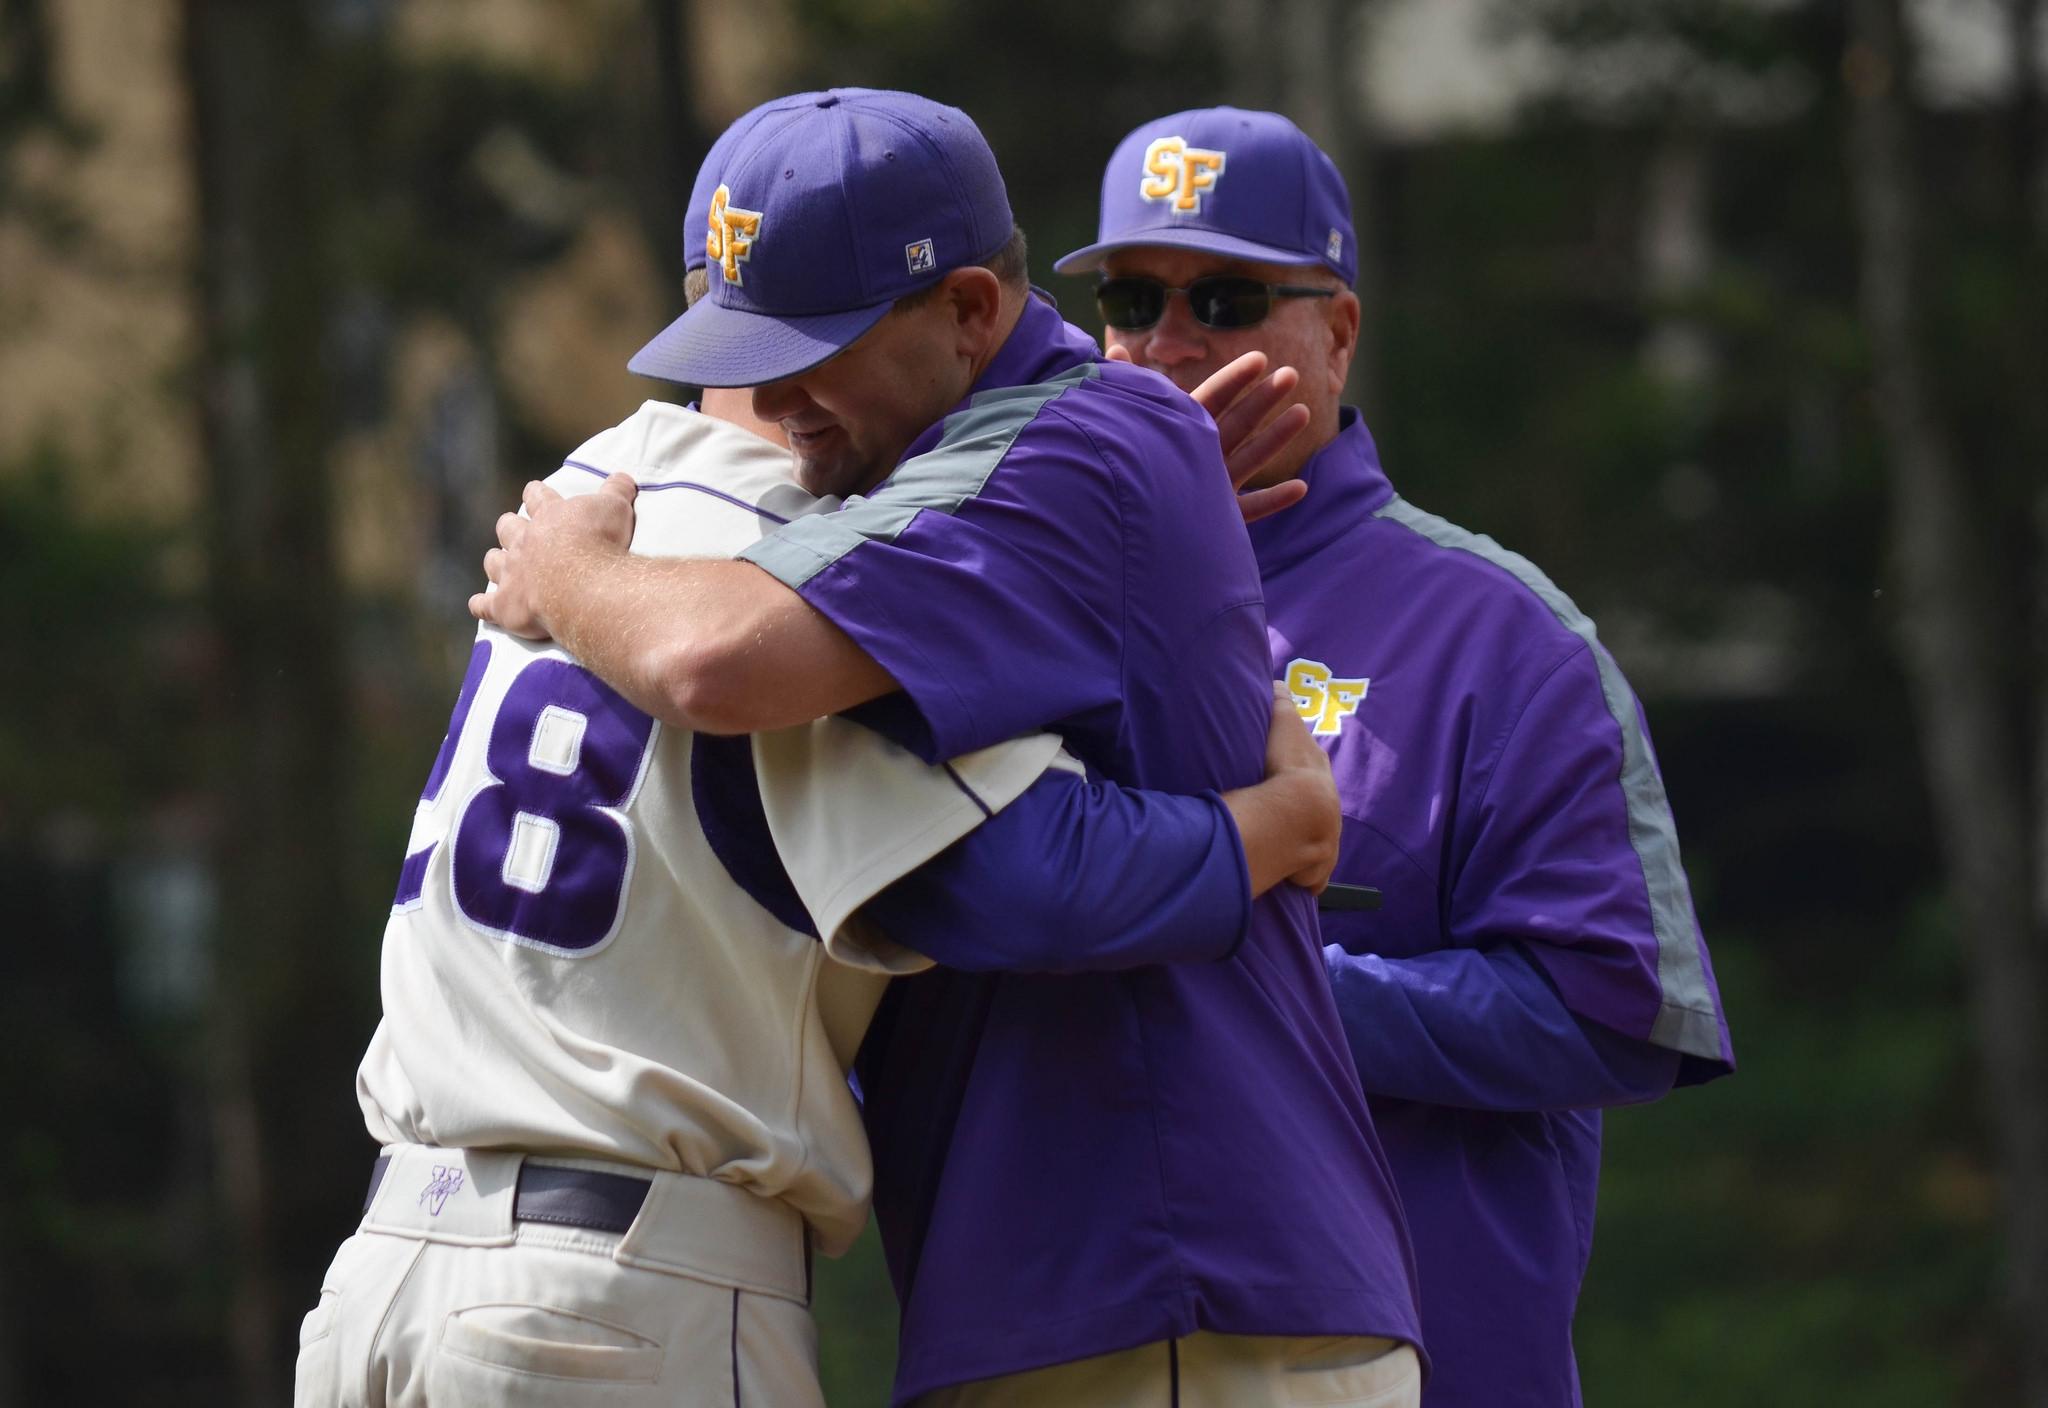 SF State senior gator Cory Davis (28) hugs the SF State baseball coaches during the senior ceremony before the game against Cal Poly Pomona at Maloney Field Sunday, May 3. (Melissa Minton / Xpress)